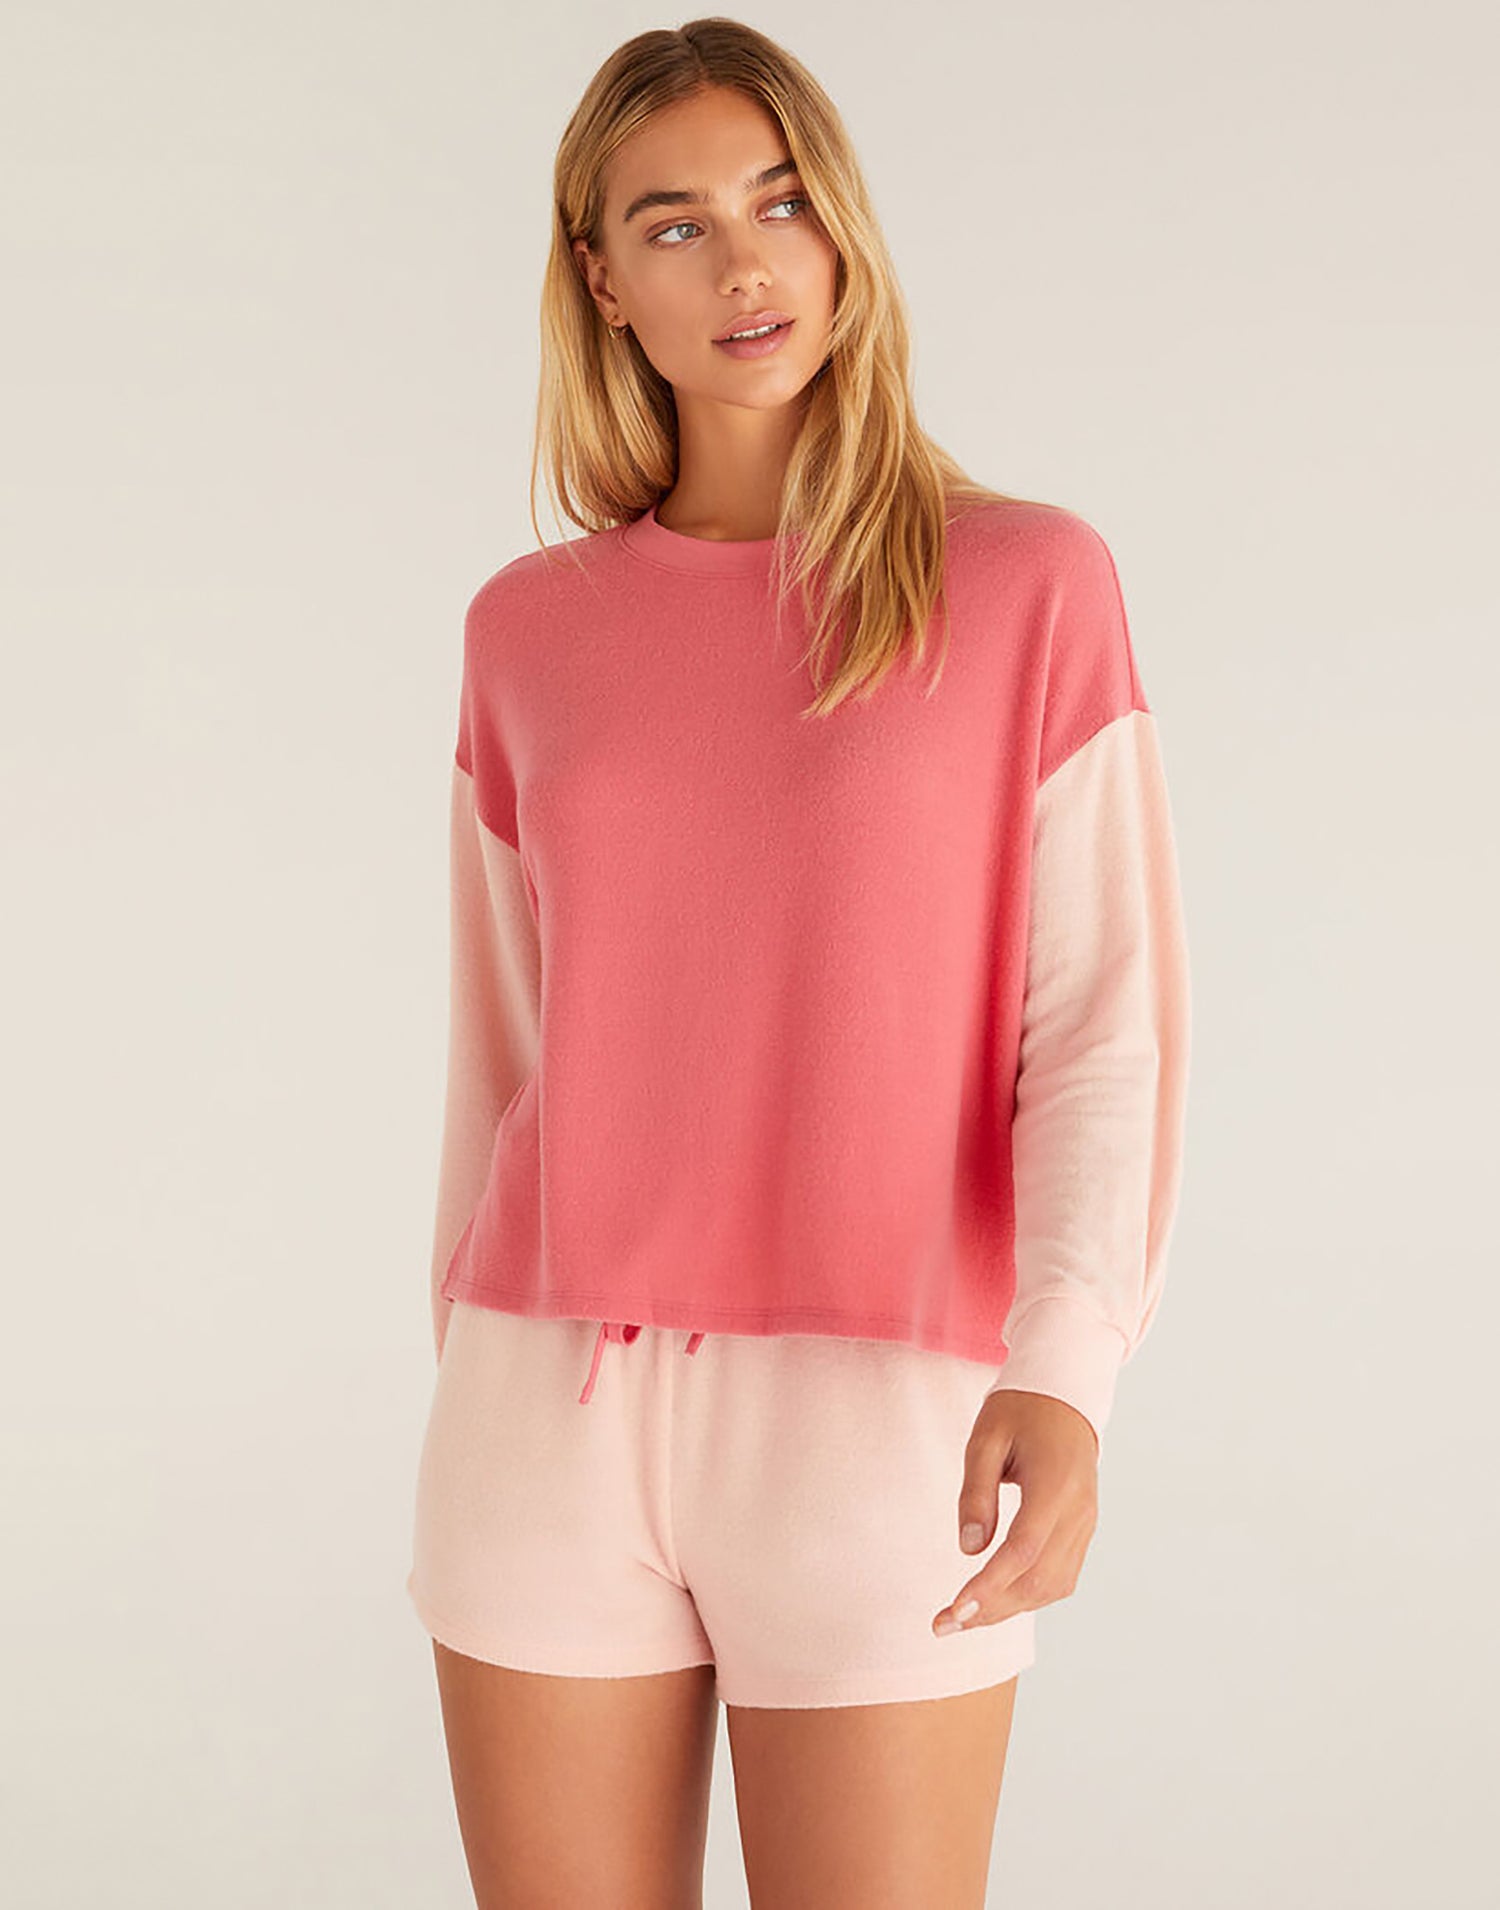 Color Block Long Sleeve Top by Z Supply in Pink Cherry - Front View